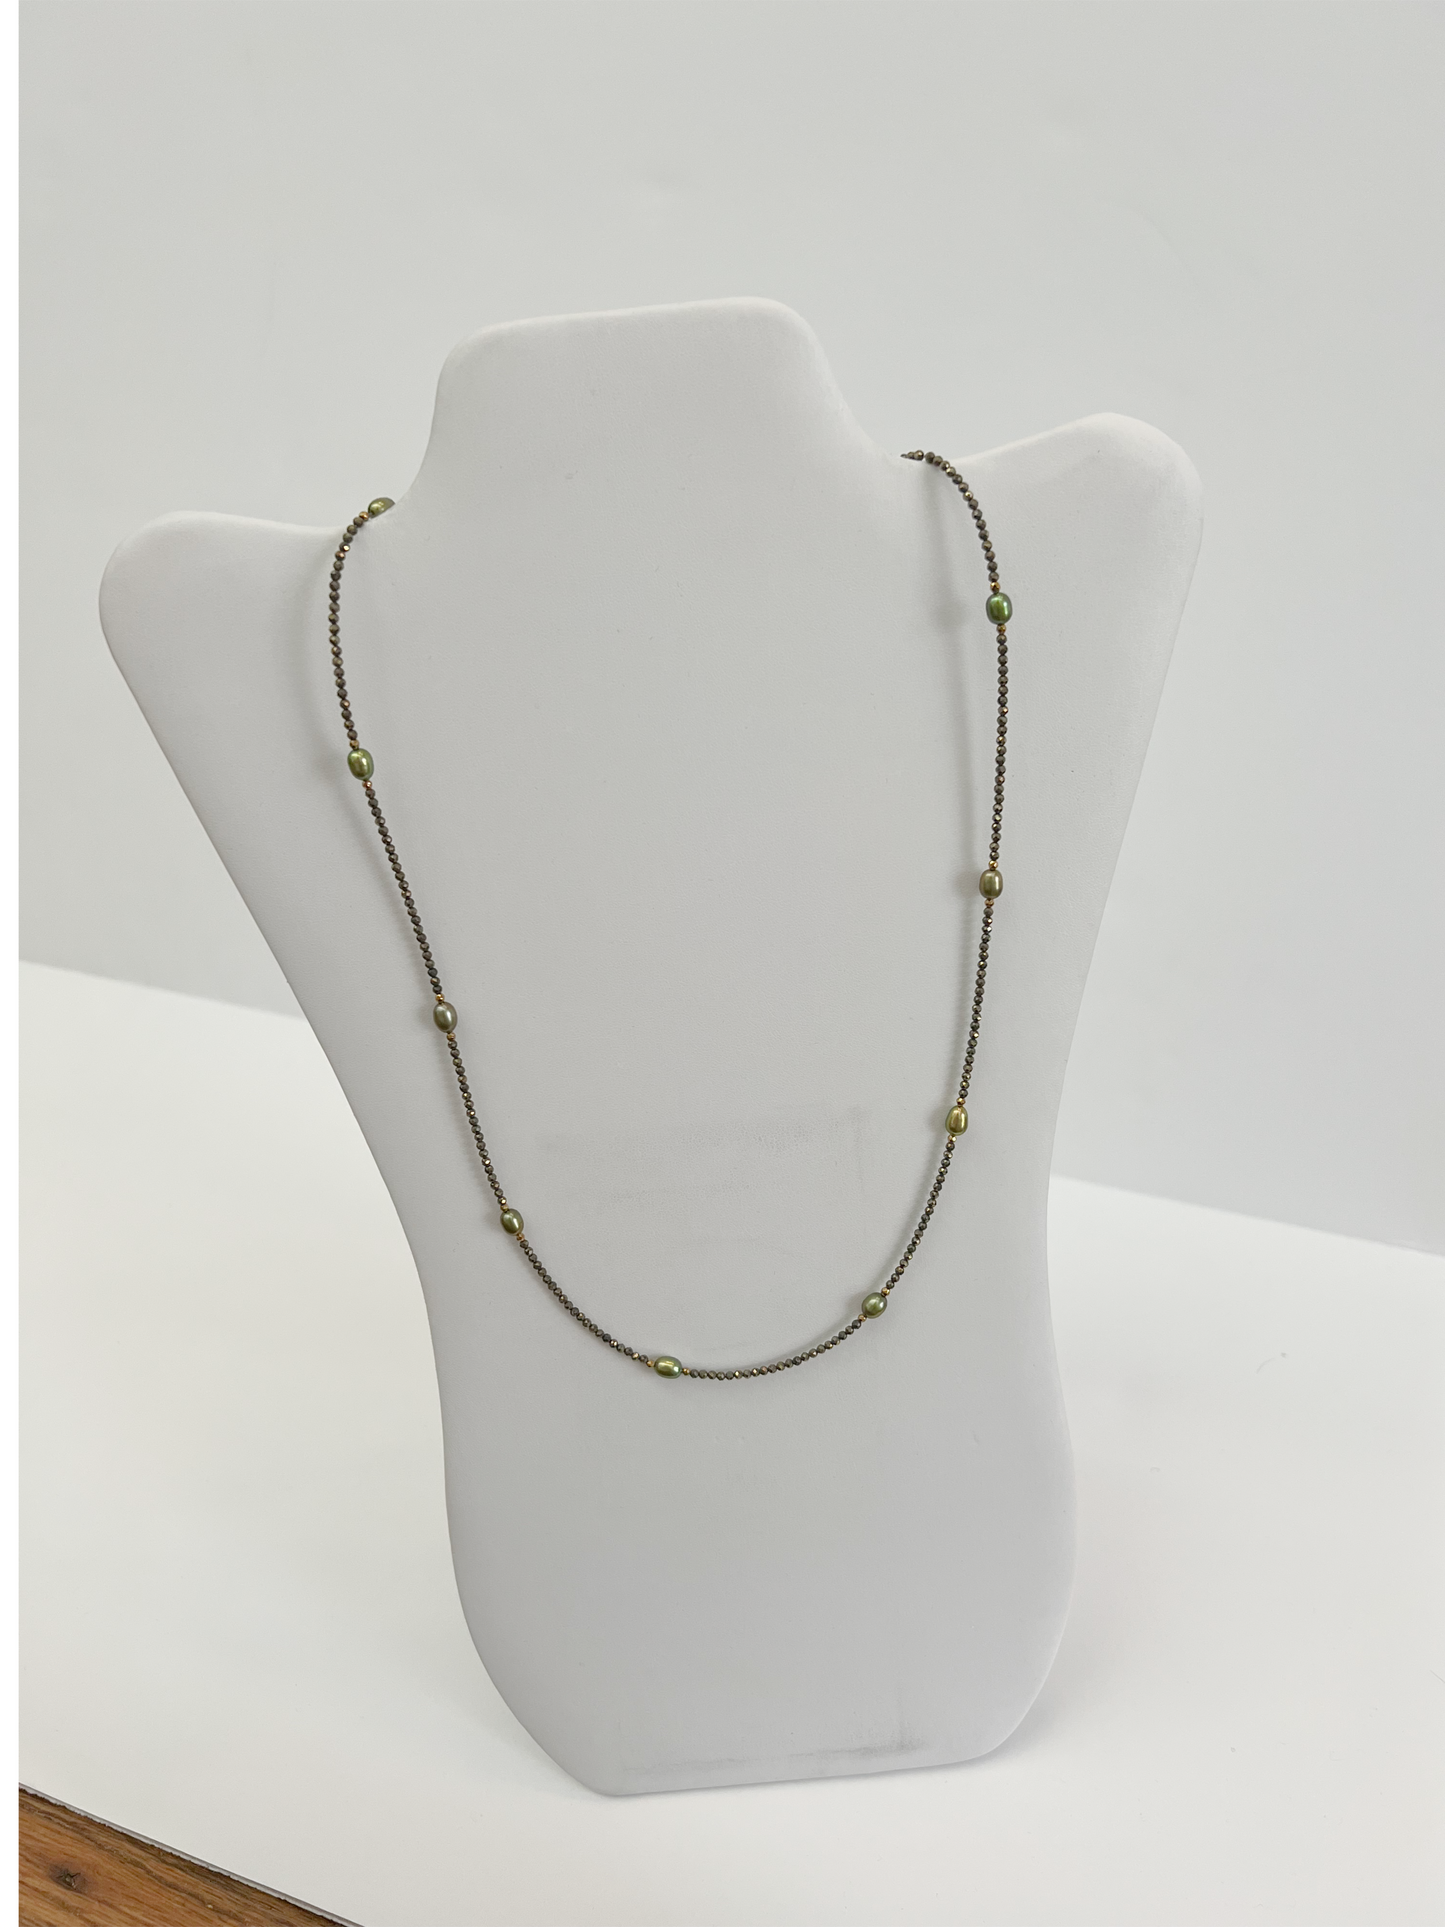 Green Pearls Gold Accents Necklace